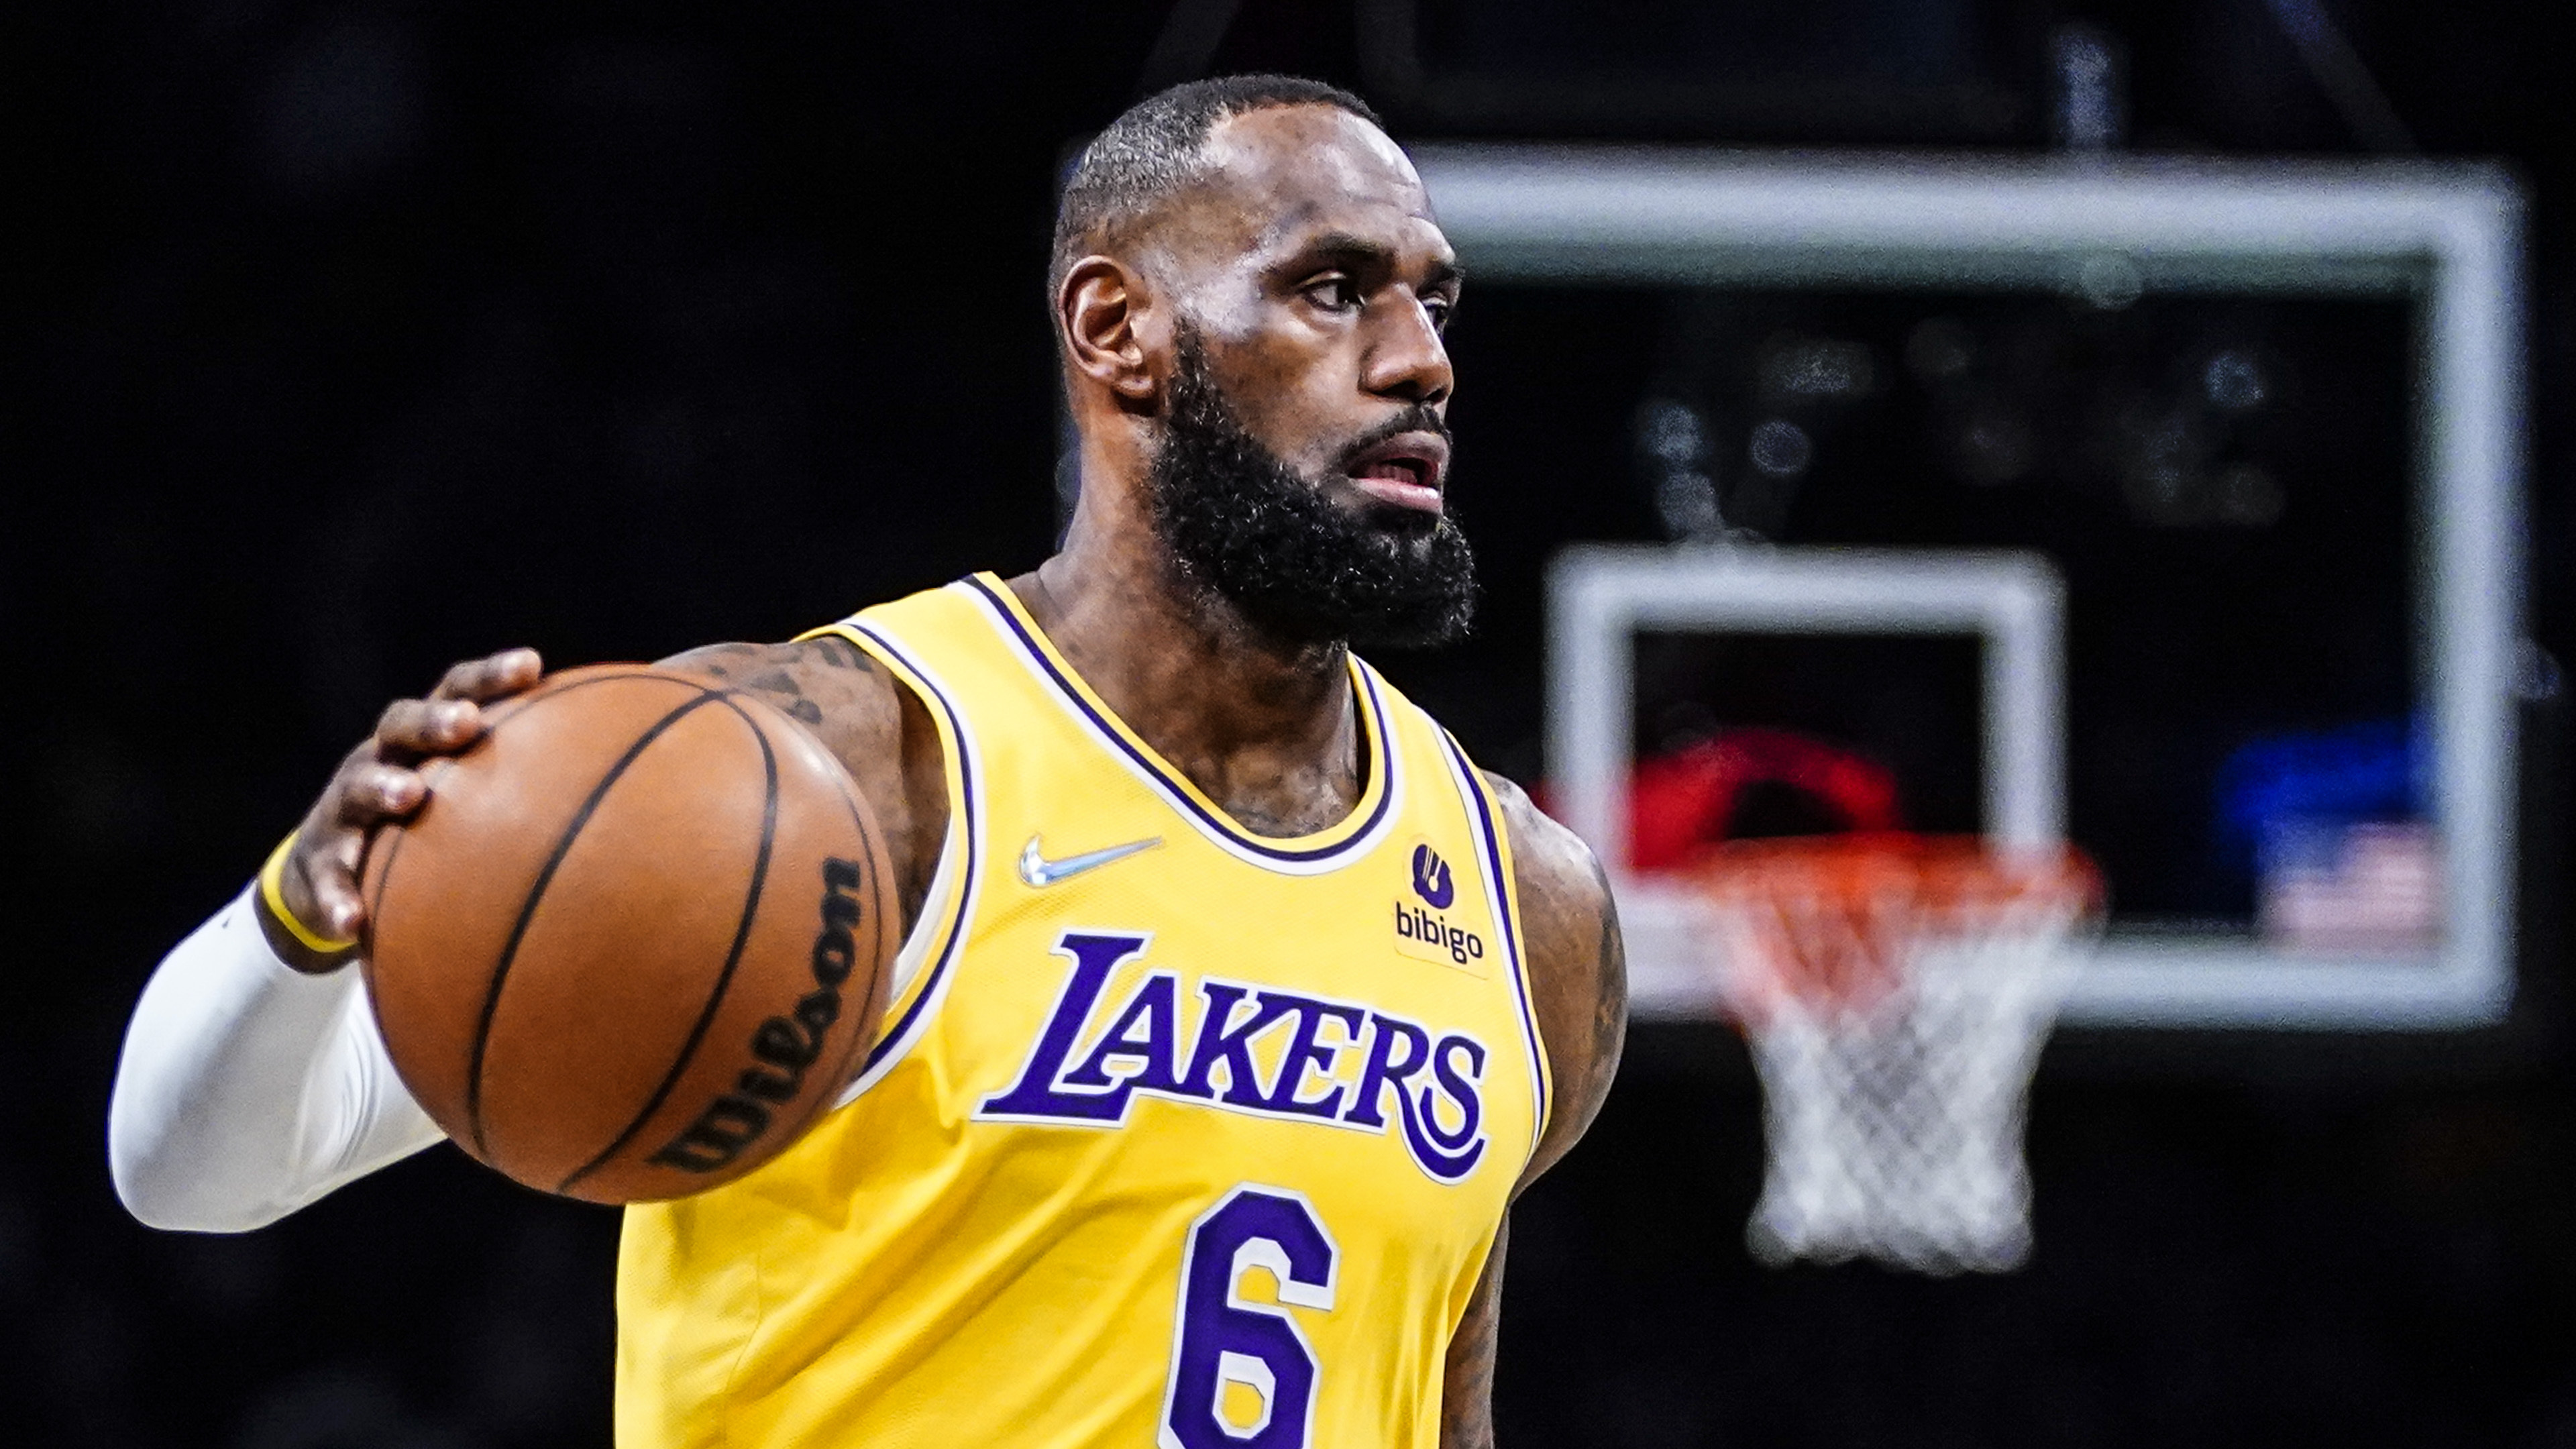 Lakers' LeBron James Out vs. Spurs with Knee Injury, Has 'Significant' Soreness